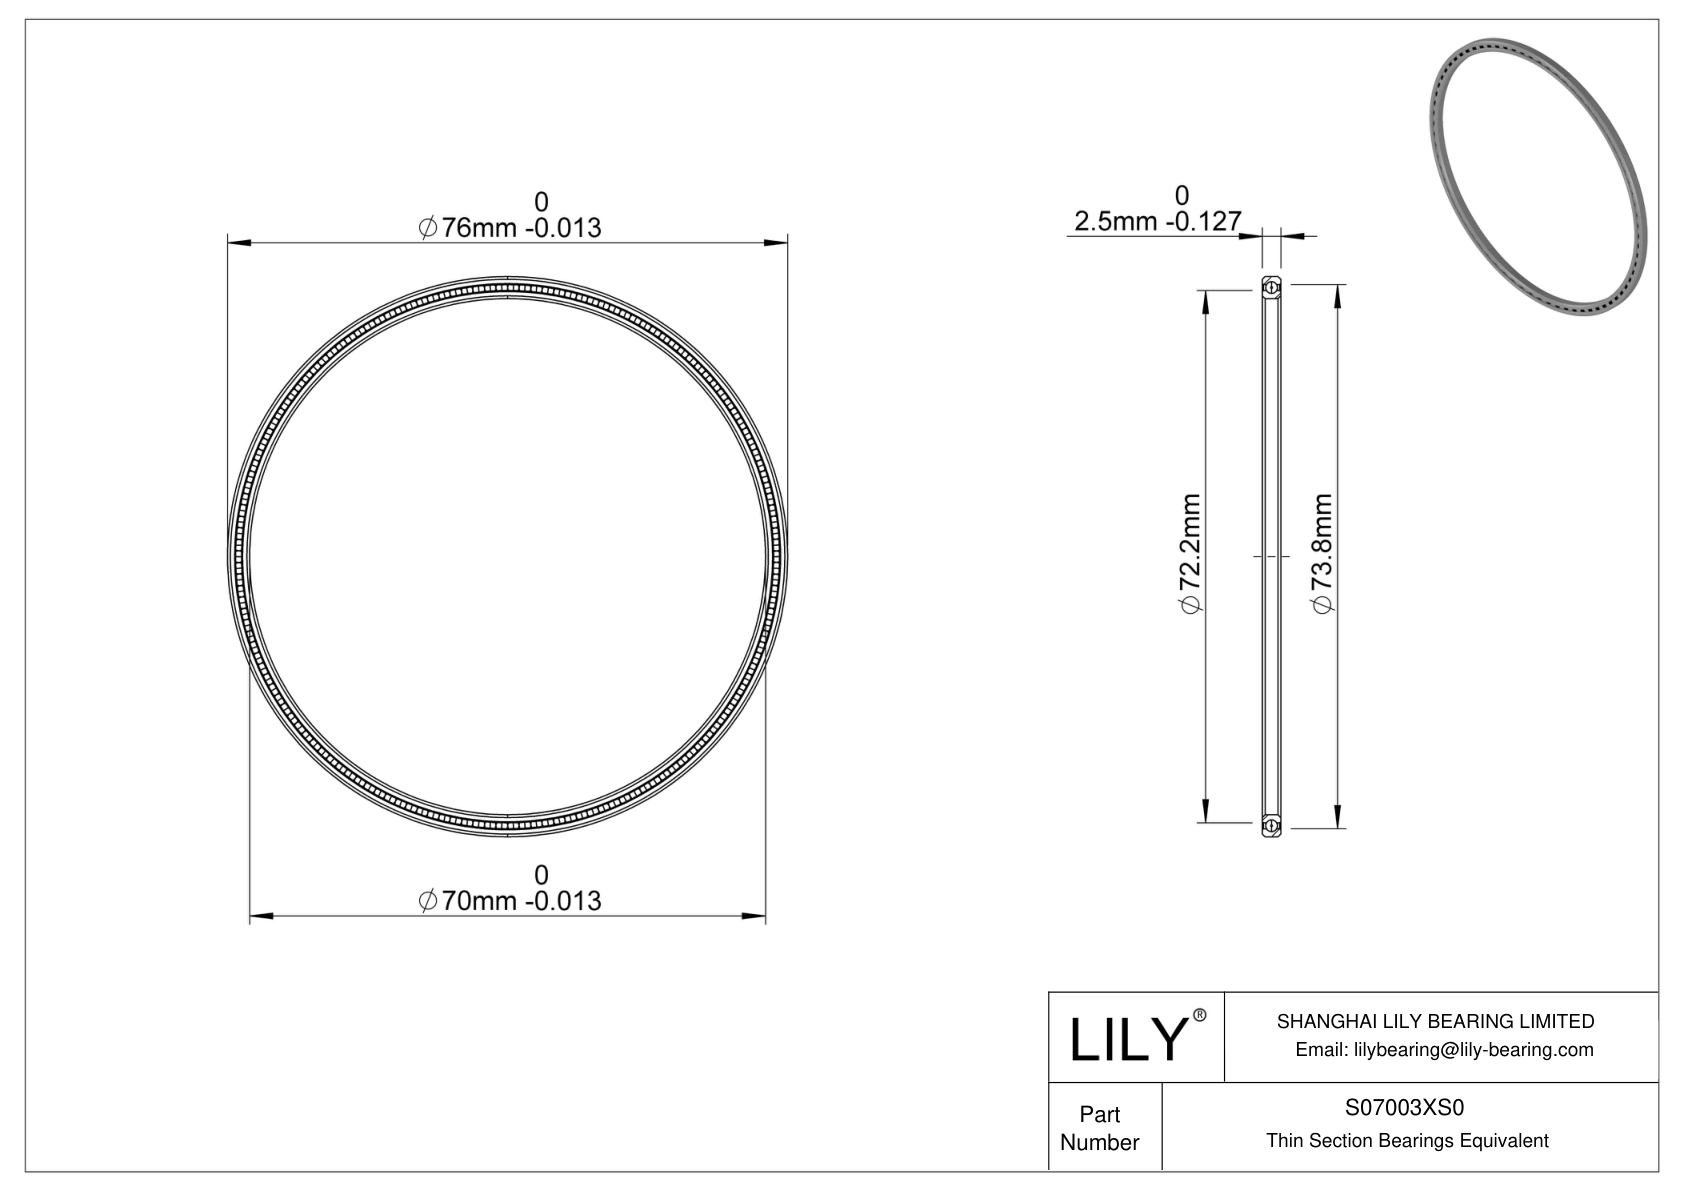 S07003XS0 Constant Section (CS) Bearings cad drawing